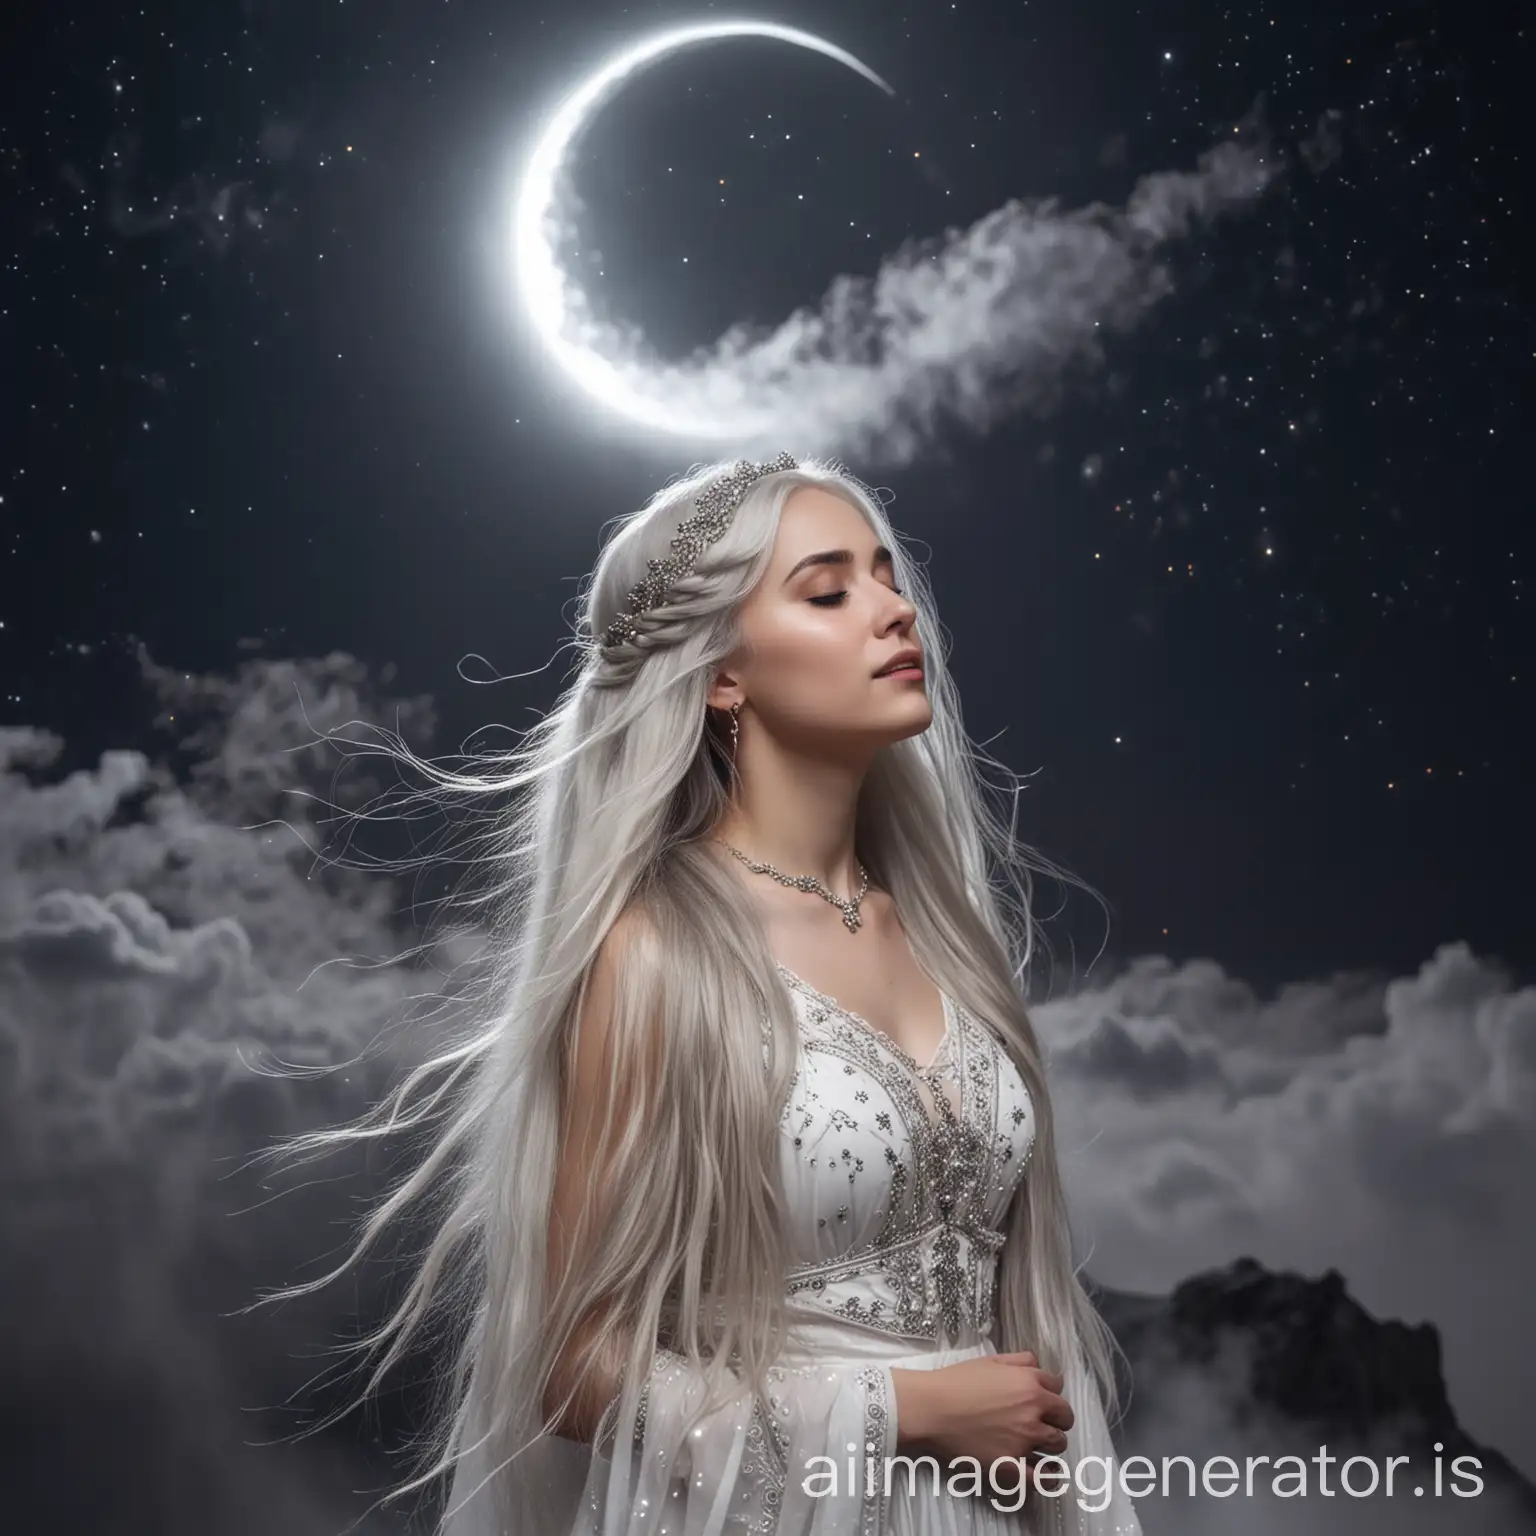 Fantasy-Woman-Standing-Under-Crescent-Moon-with-Long-Braids-and-Tiara